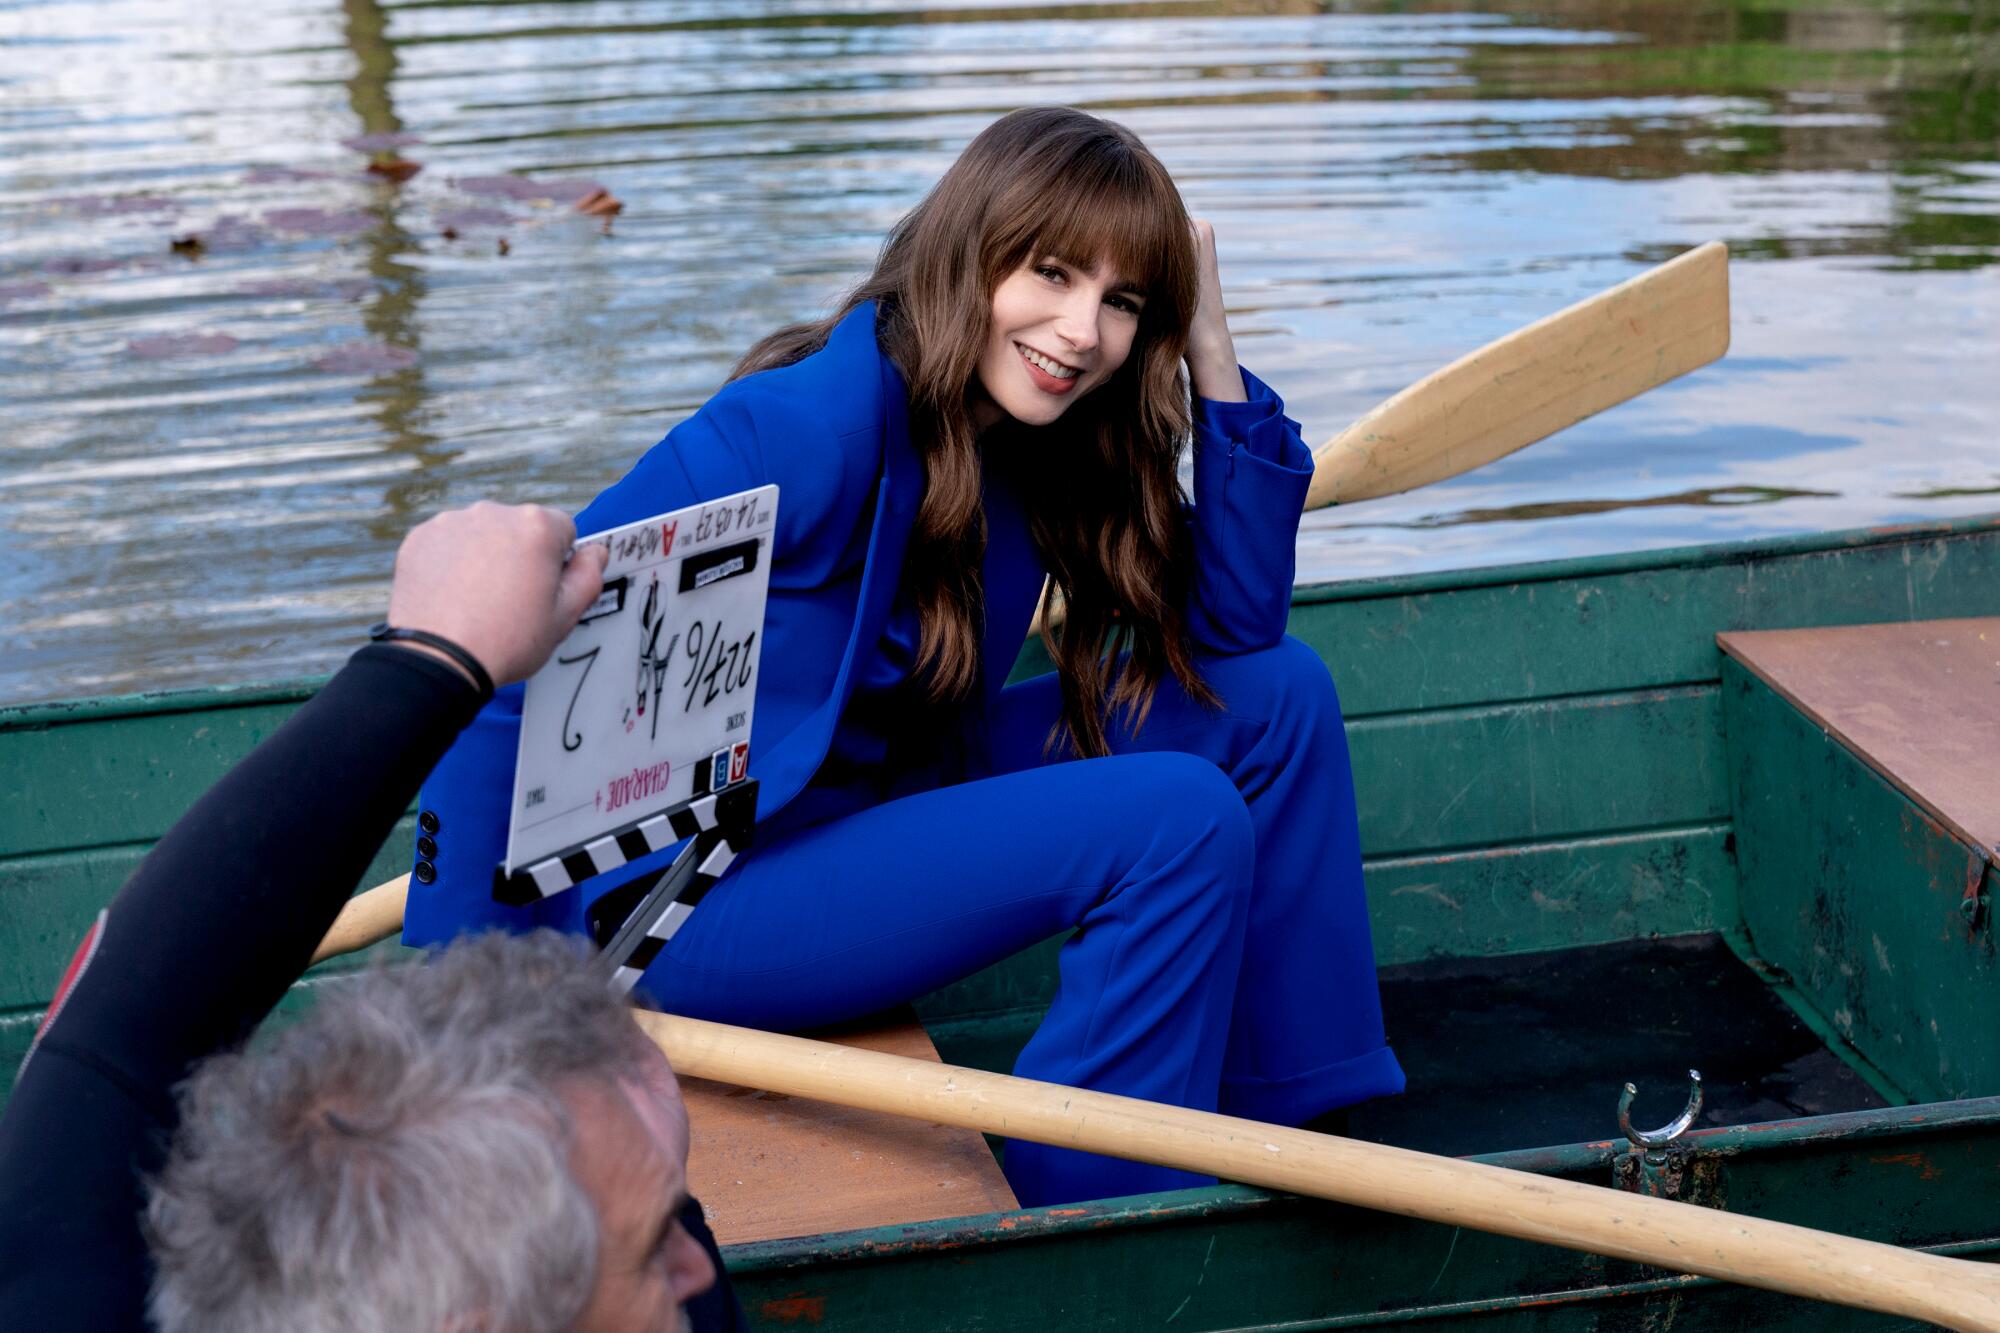 A woman in a blue suit sits near a pair of oars in a rowboat on water.